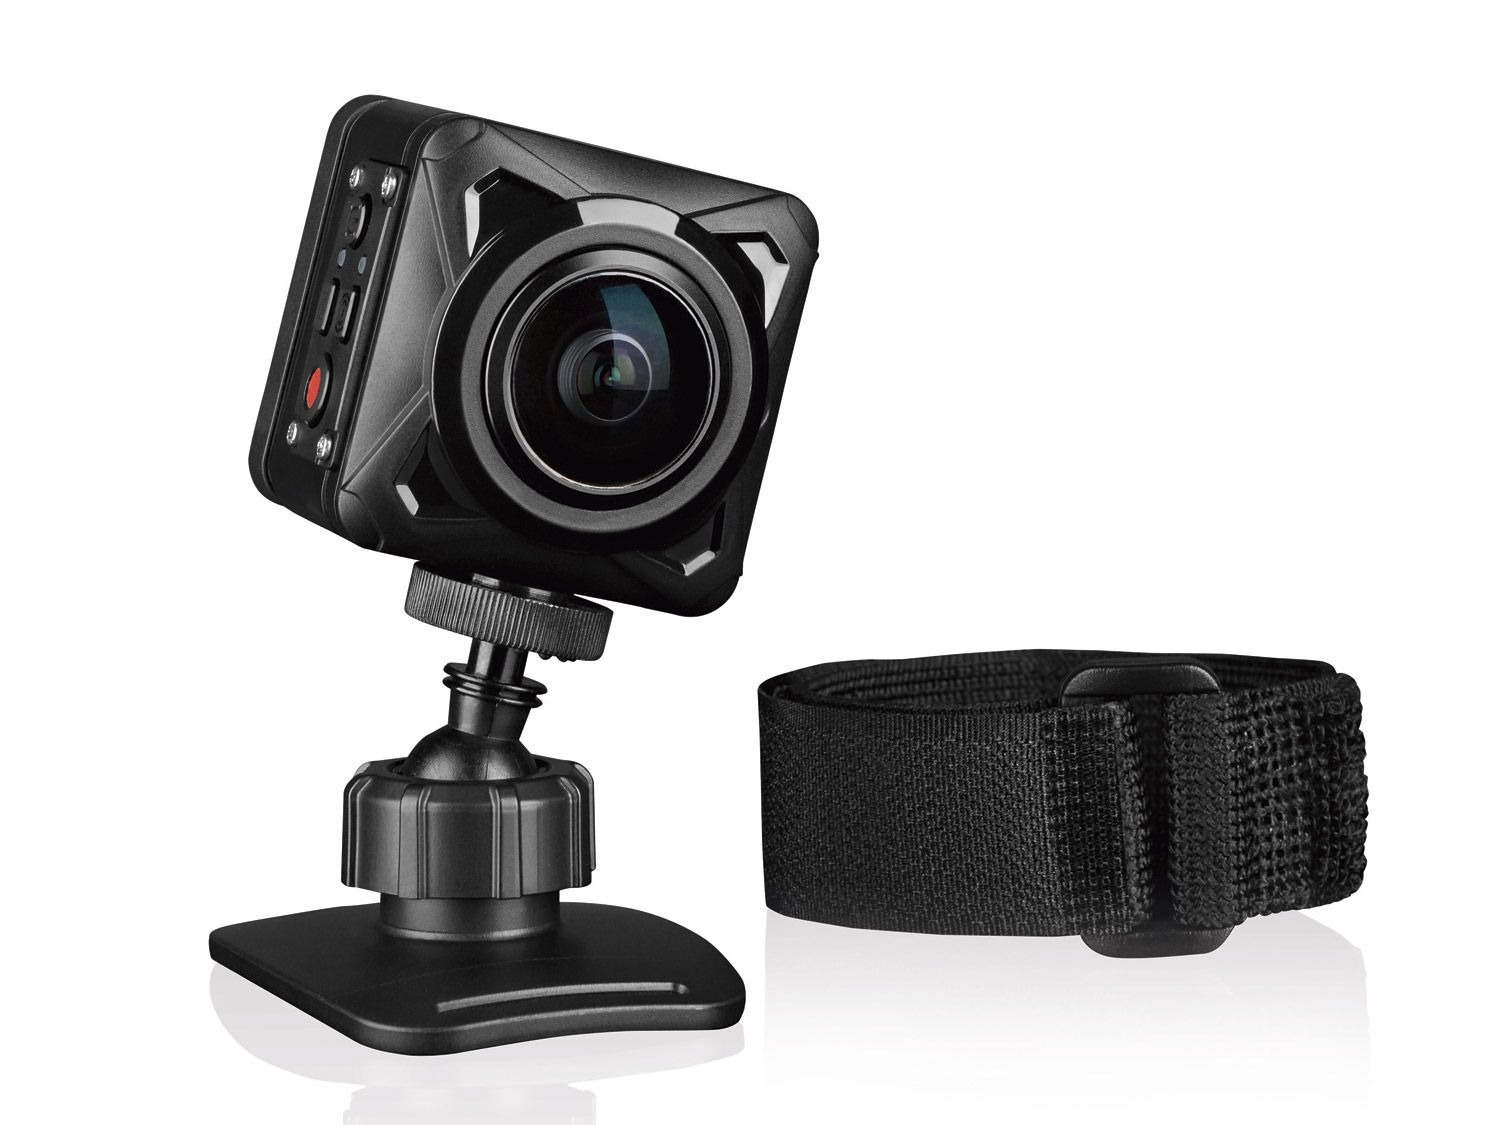 US dollar Uitwisseling dier SILVERCREST® 360° panorama-camcorder | LIDL